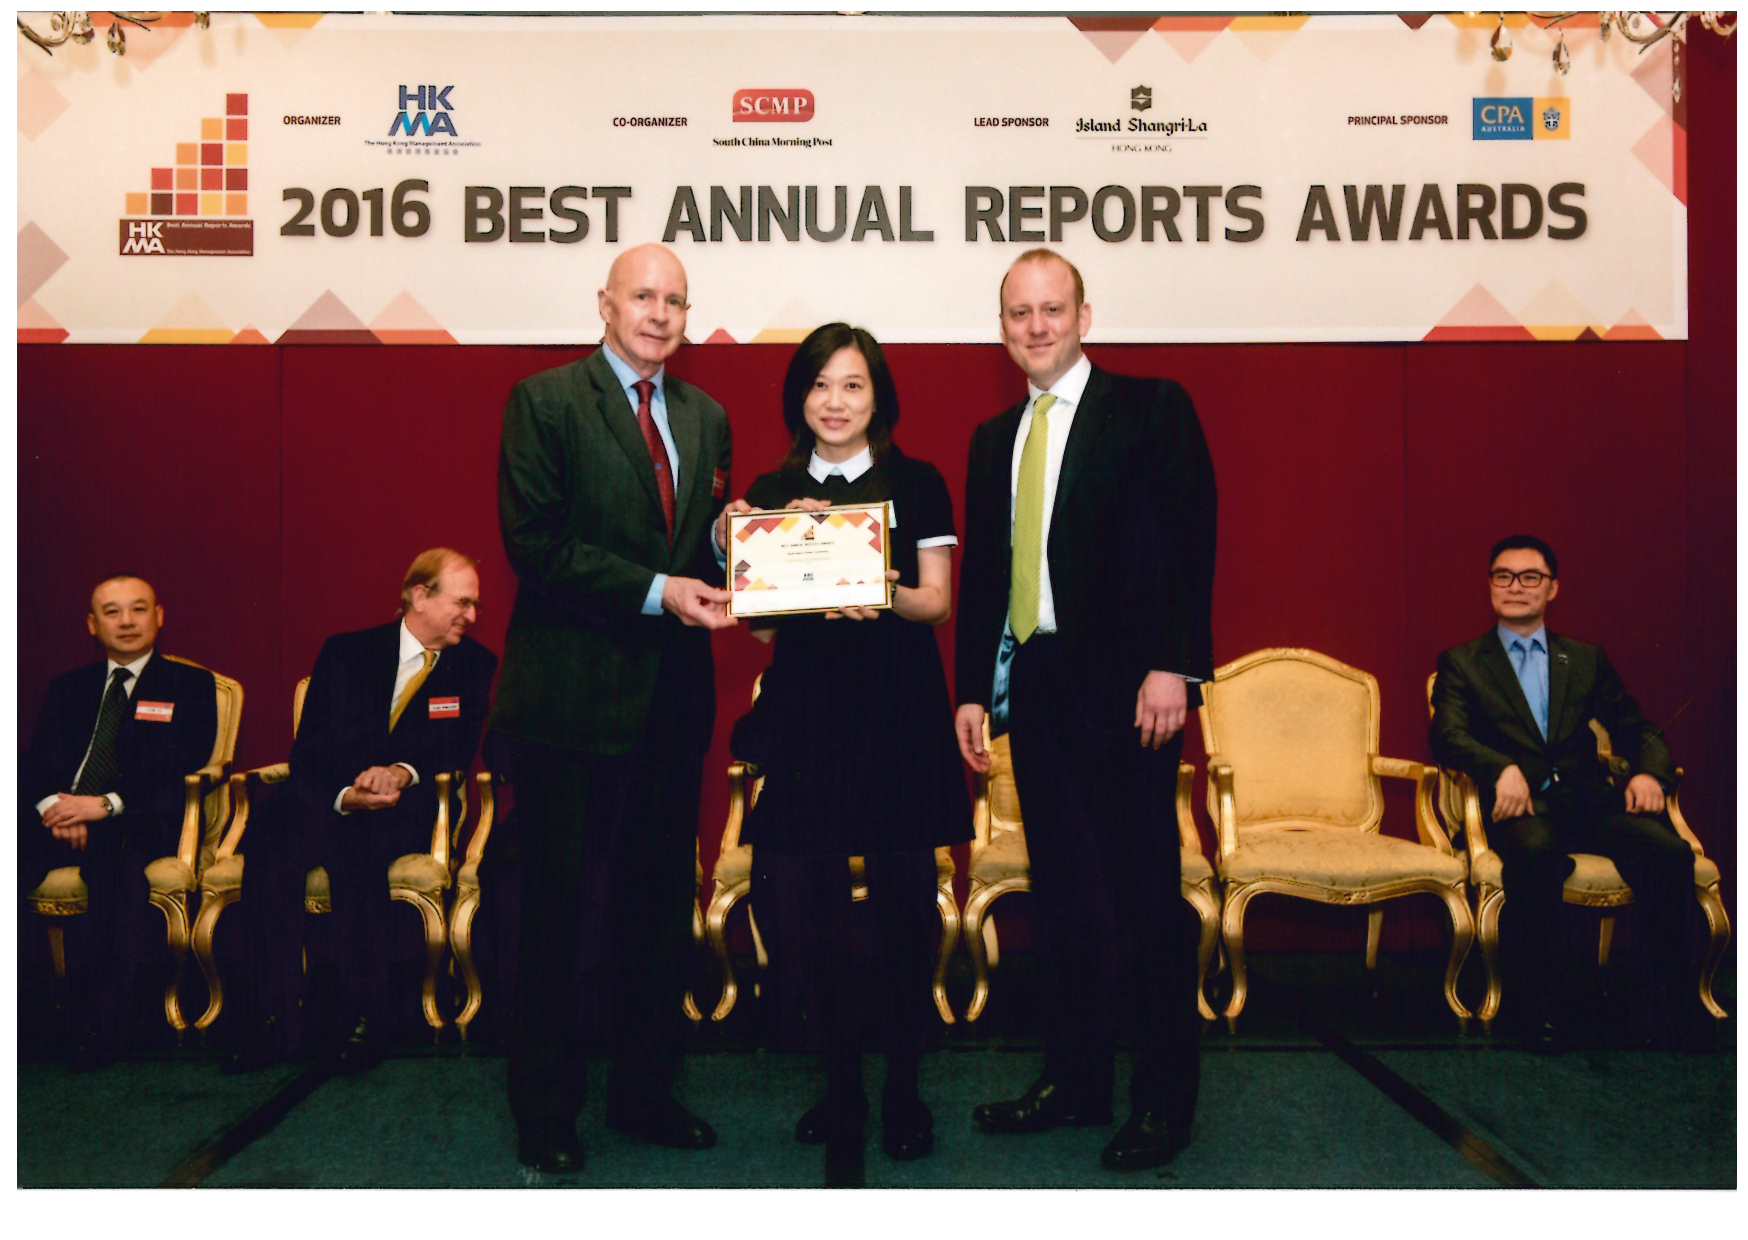 EOC representative receives an award in the HKMA Best Annual Reports Competition